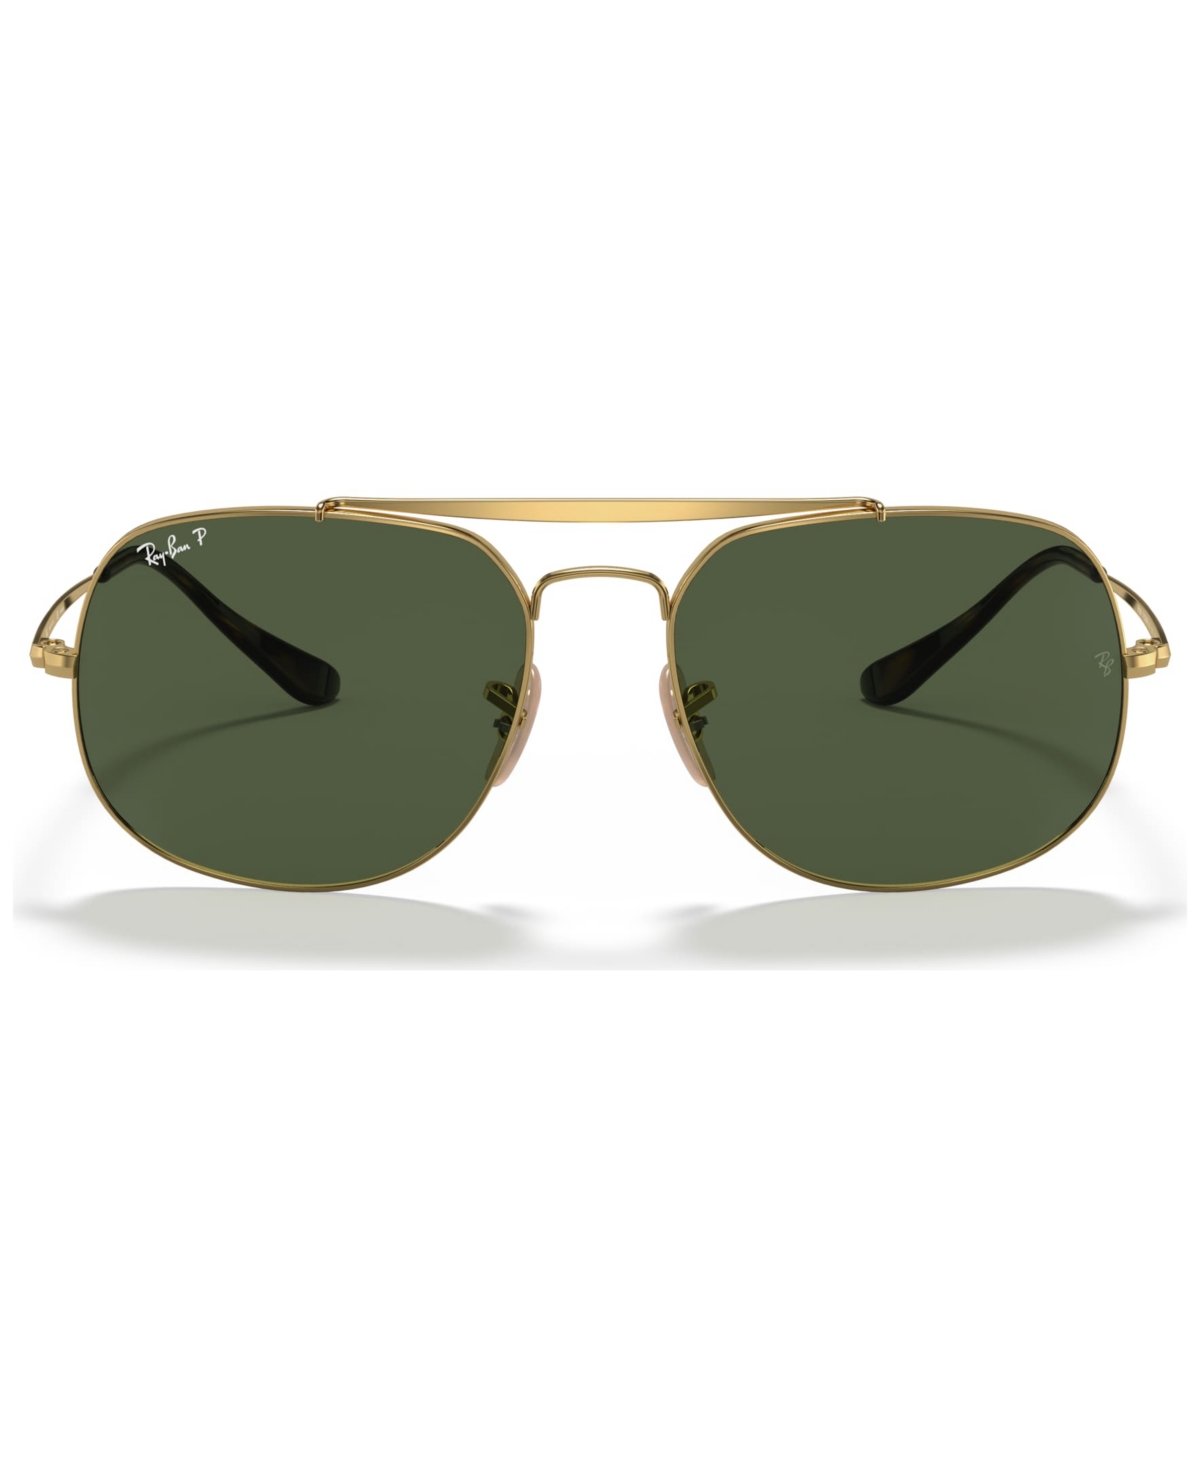 RAY BAN SUNGLASSES, RB3561 THE GENERAL